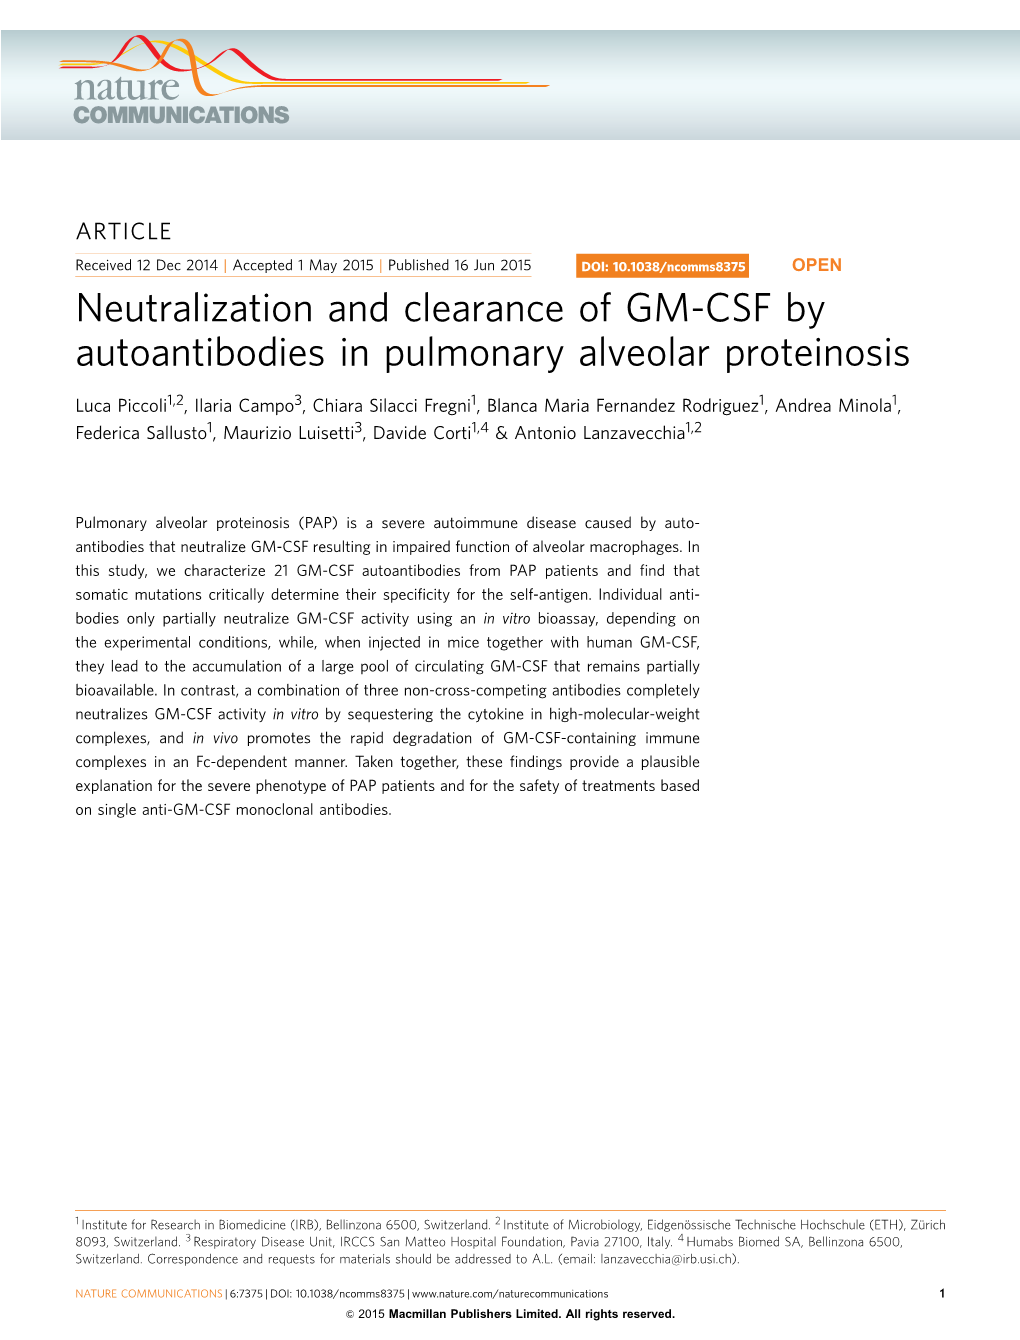 Neutralization and Clearance of GM-CSF by Autoantibodies in Pulmonary Alveolar Proteinosis